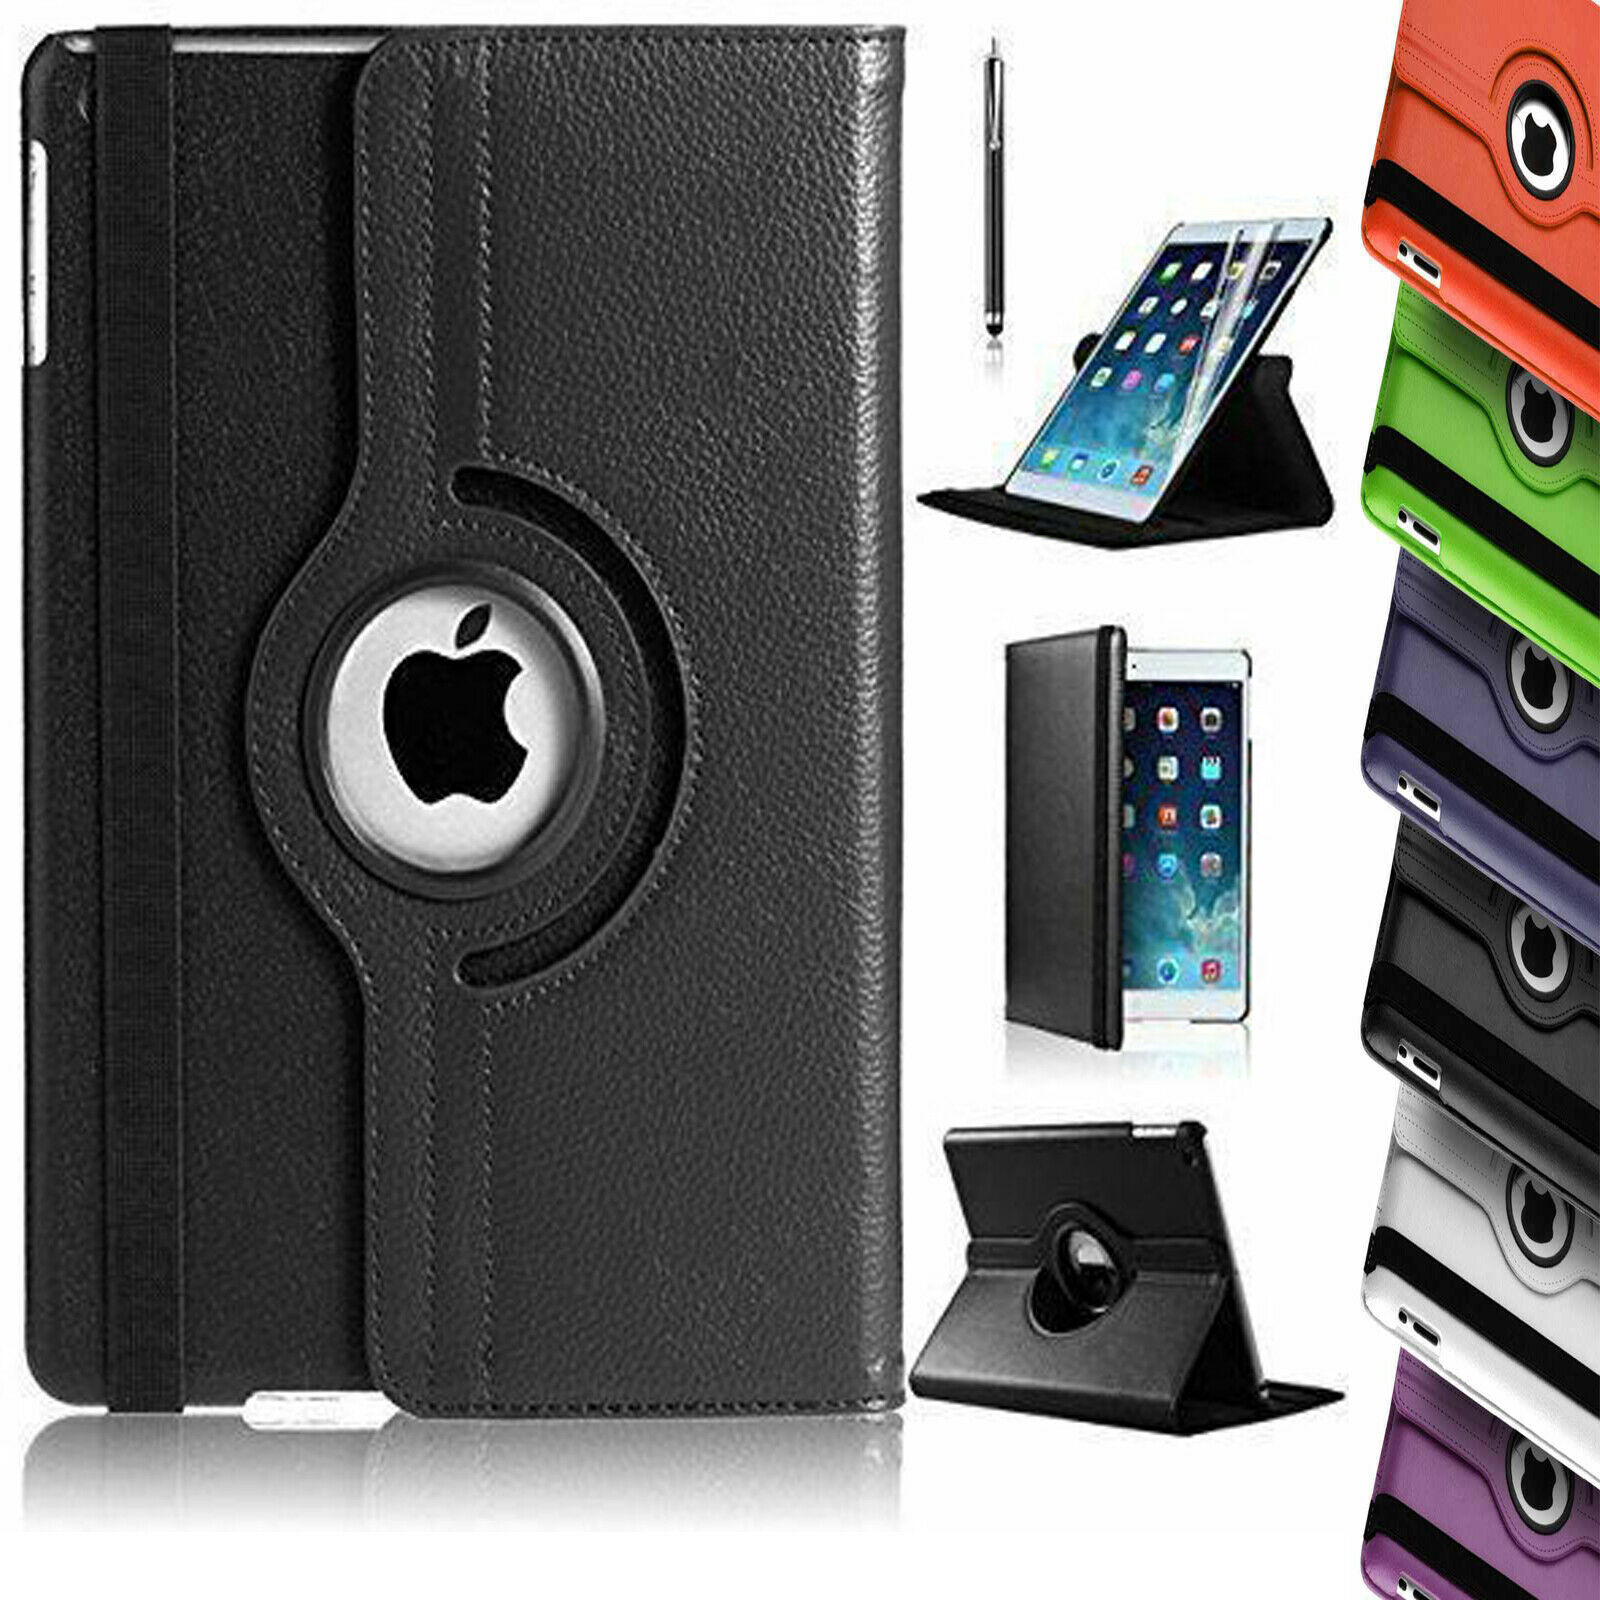 IPADT360: 360 Rotating TPU Stand Case Cover For Apple iPad